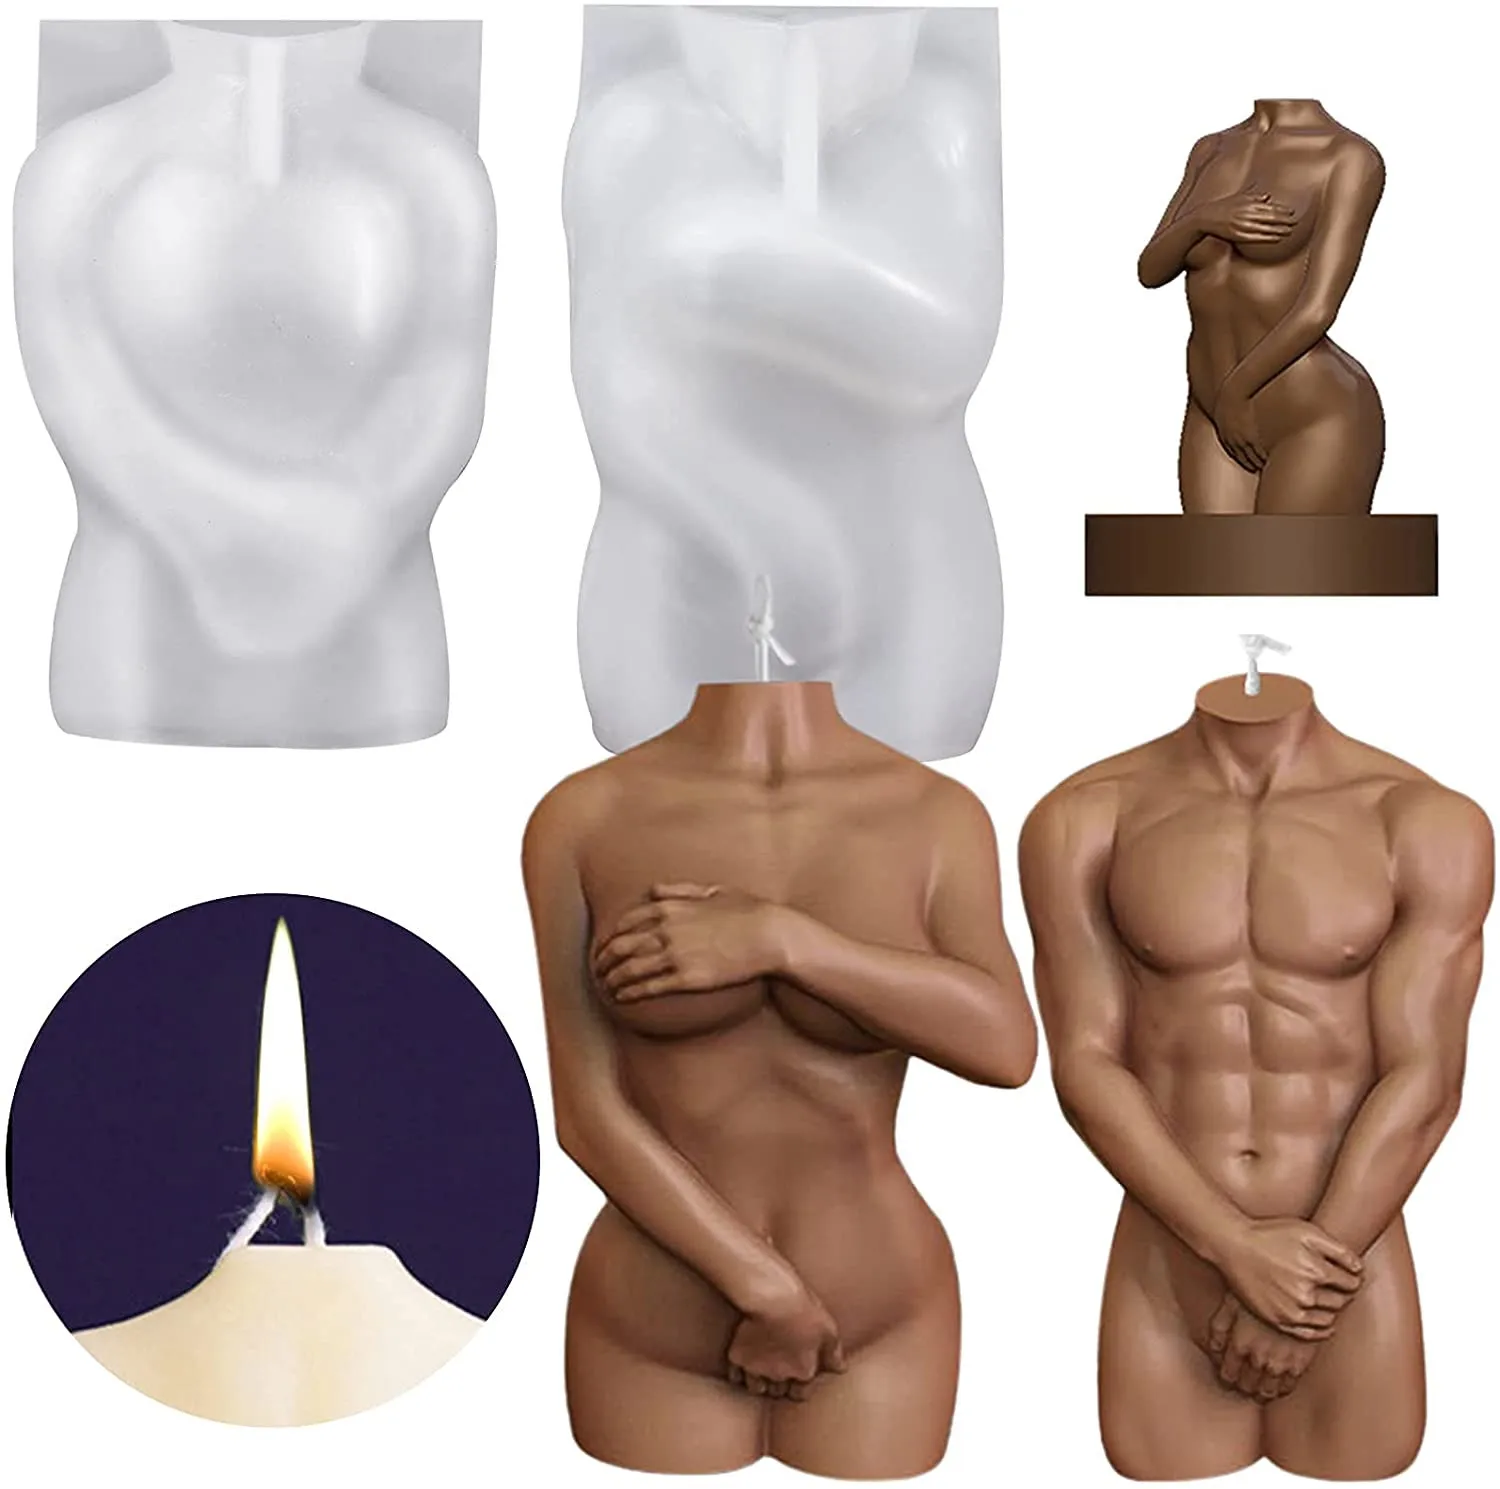 Art Female Shape Silicone Mold for Birthday Gift Candle Making, DIY Craft Making Silicone 3D Human Body Shape Candle Mold